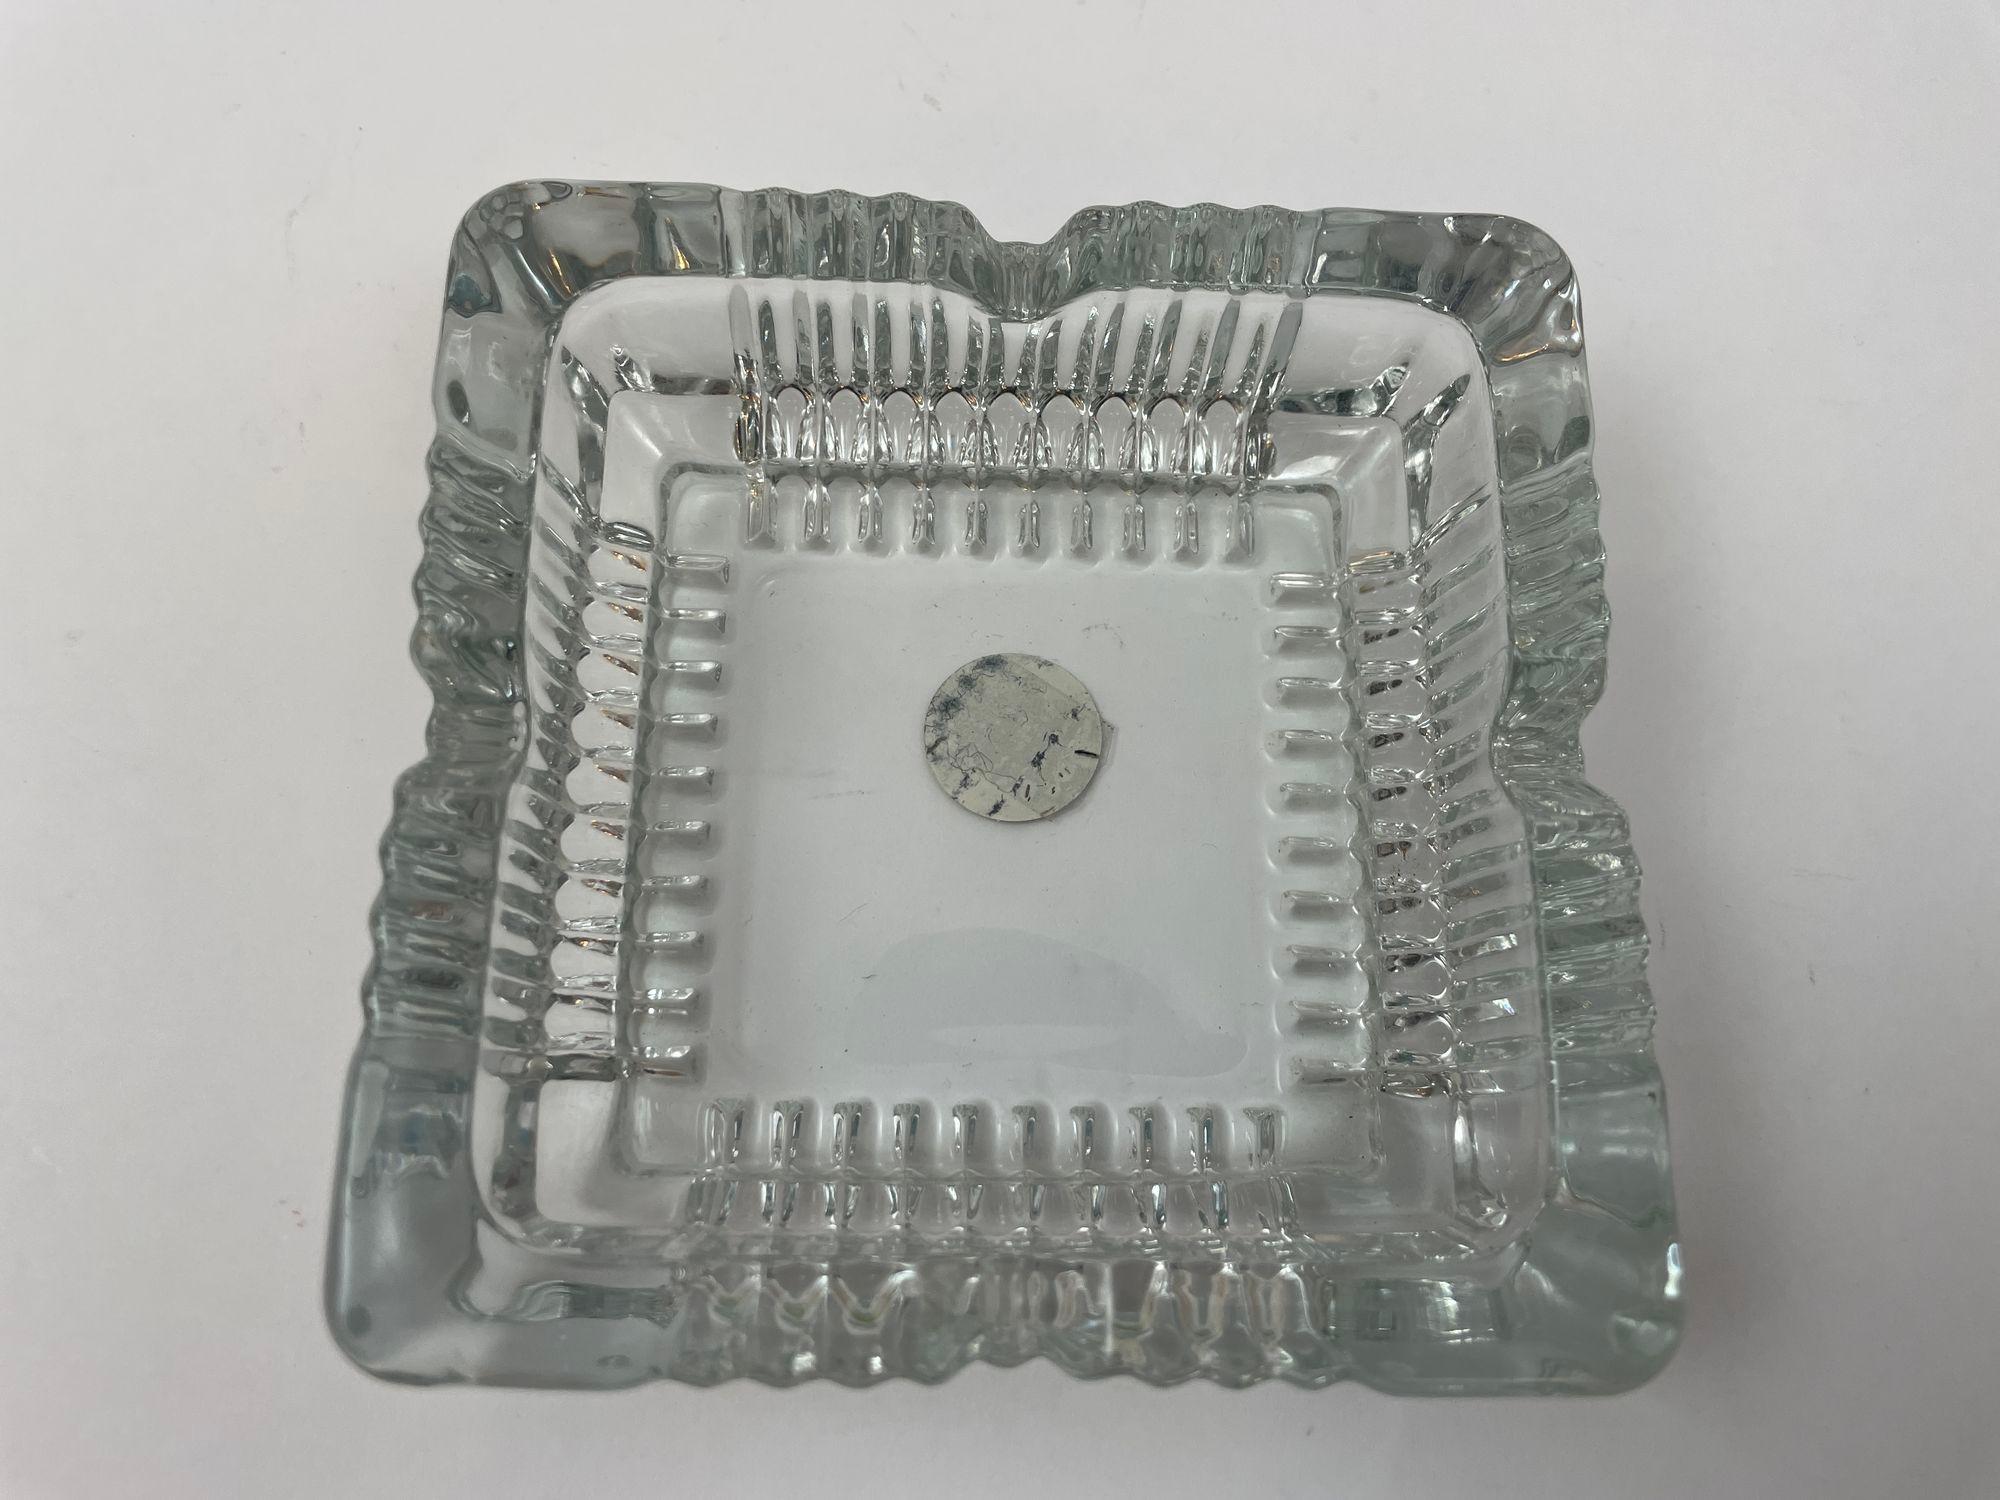 Post-Modern Cristal D'Arques Crystal Ashtray Trinket Dish France Cut Glass Square Catchall For Sale